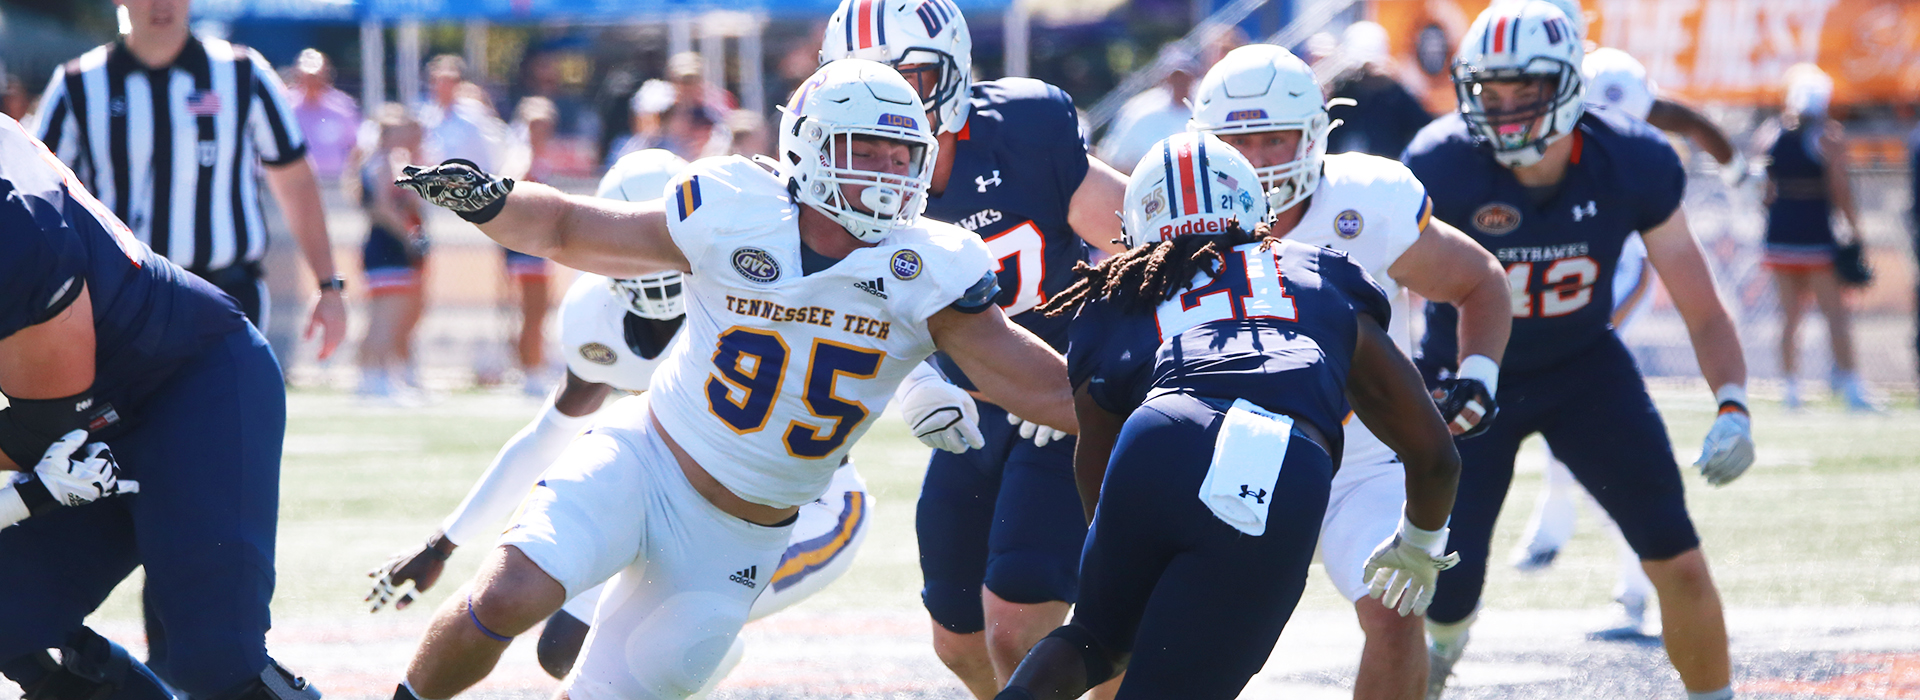 Big plays difference in Golden Eagles' loss at No. 15 UT Martin